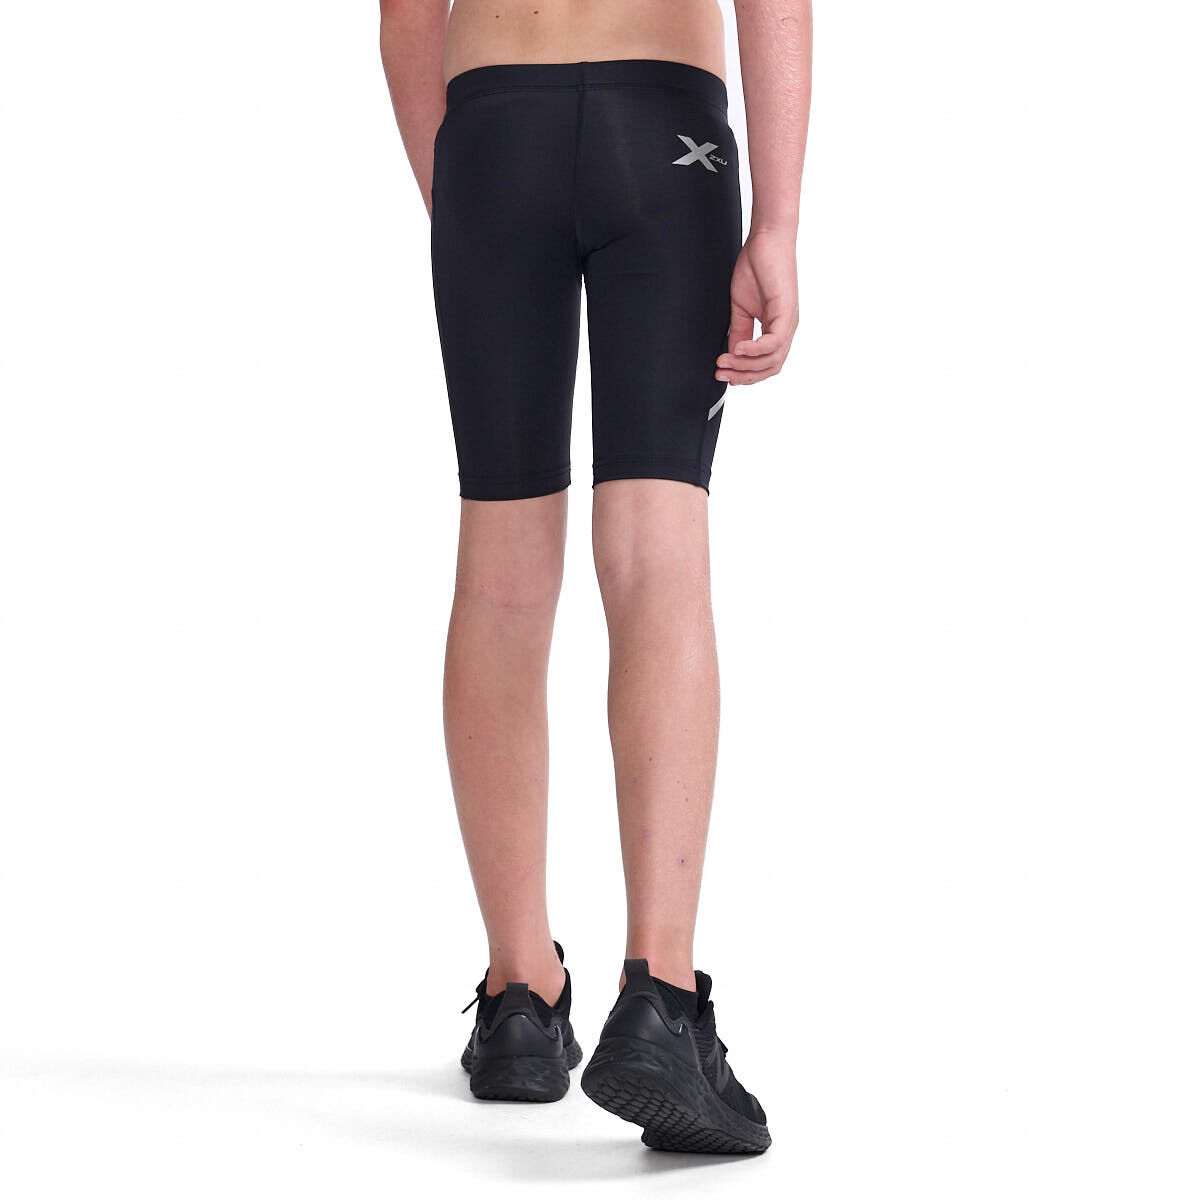 Youth Compression Shorts & Pants